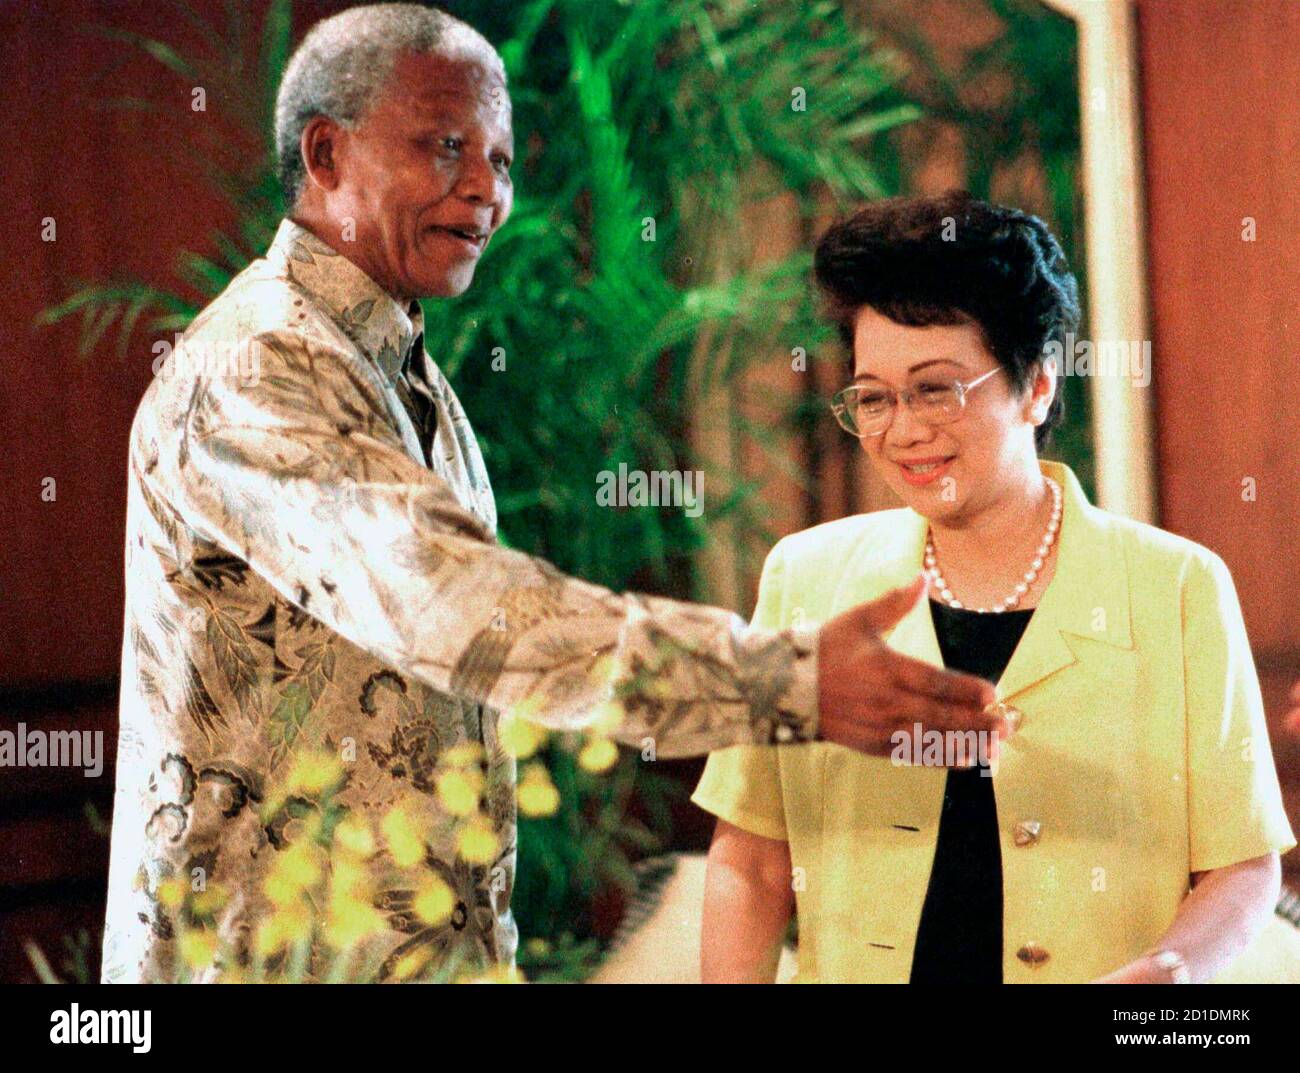 Corazon Aquino High Resolution Stock Photography and Images - Alamy